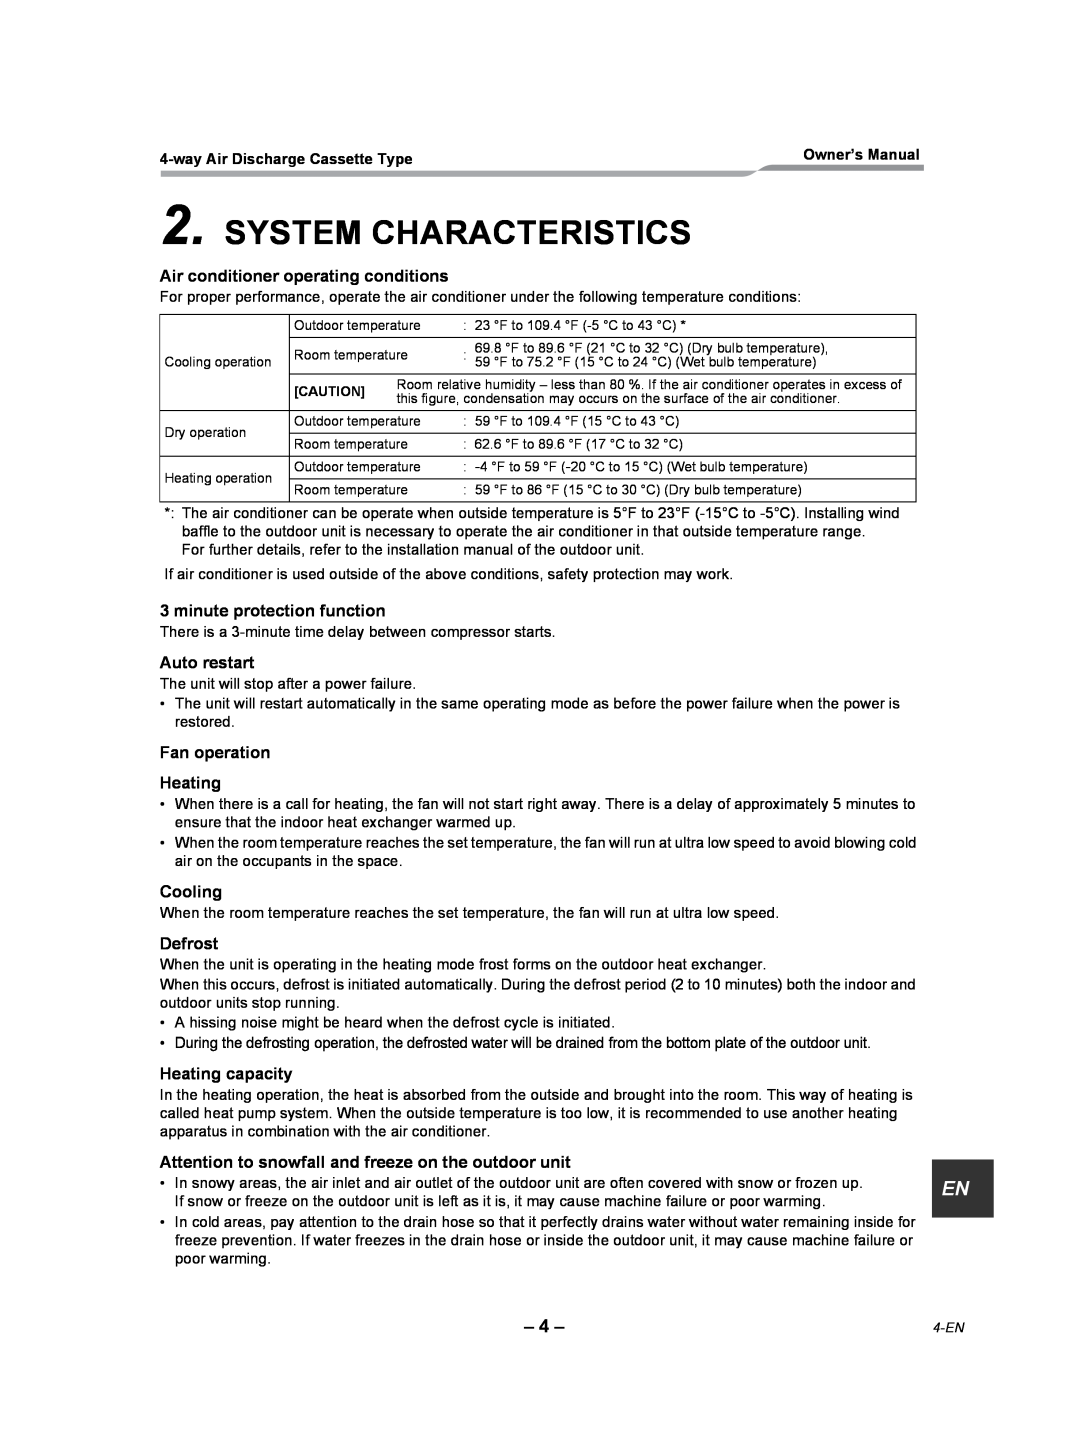 Toshiba RAV-SP300UT-UL System Characteristics, Air conditioner operating conditions, minute protection function, Cooling 